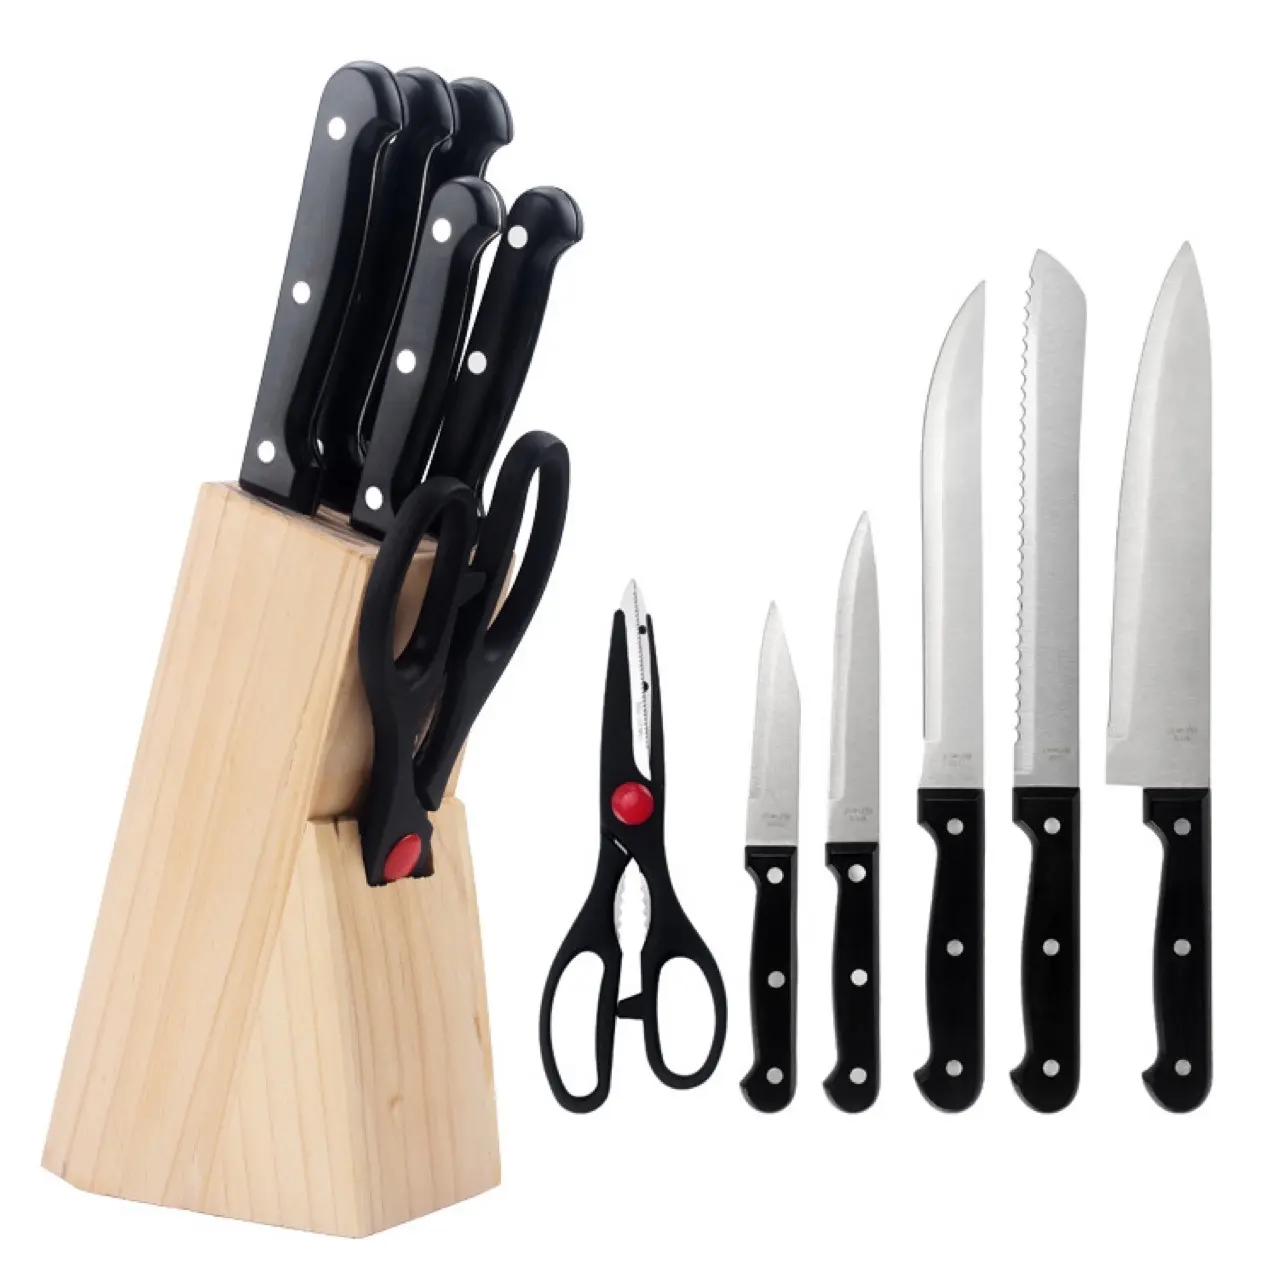 A2754 Best Quality Kitchen Gift 8pcs Tool Knife Sets With Wood Base Sharpen Cutter Sets Stainless Steel Kitchen Knives Set